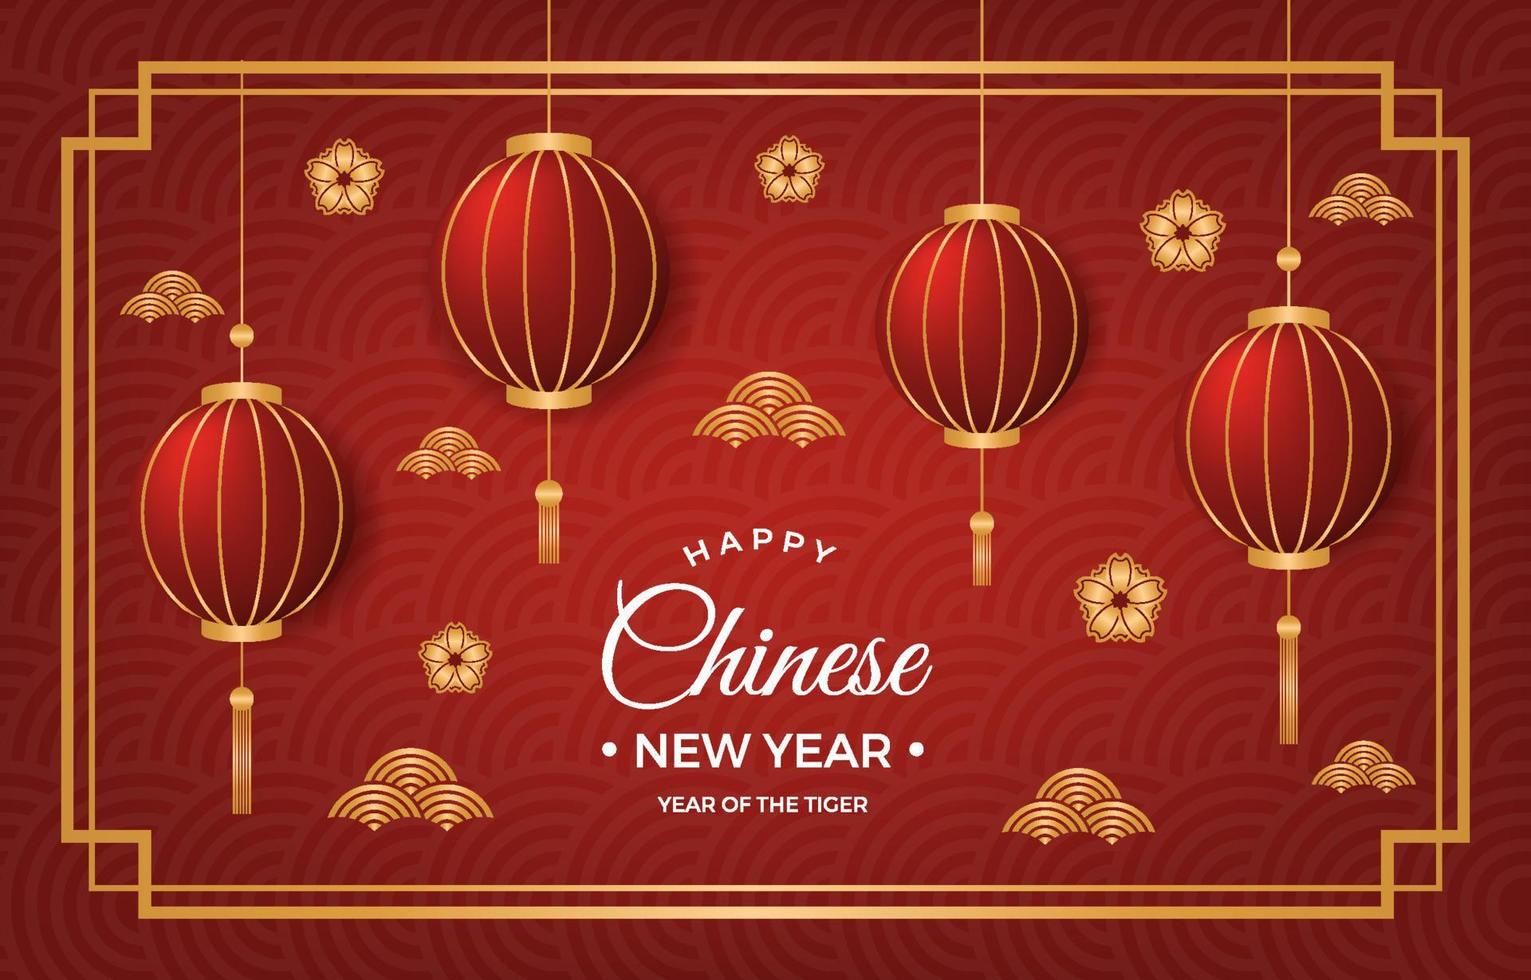 Chinese New Year Background with Lantern Theme vector